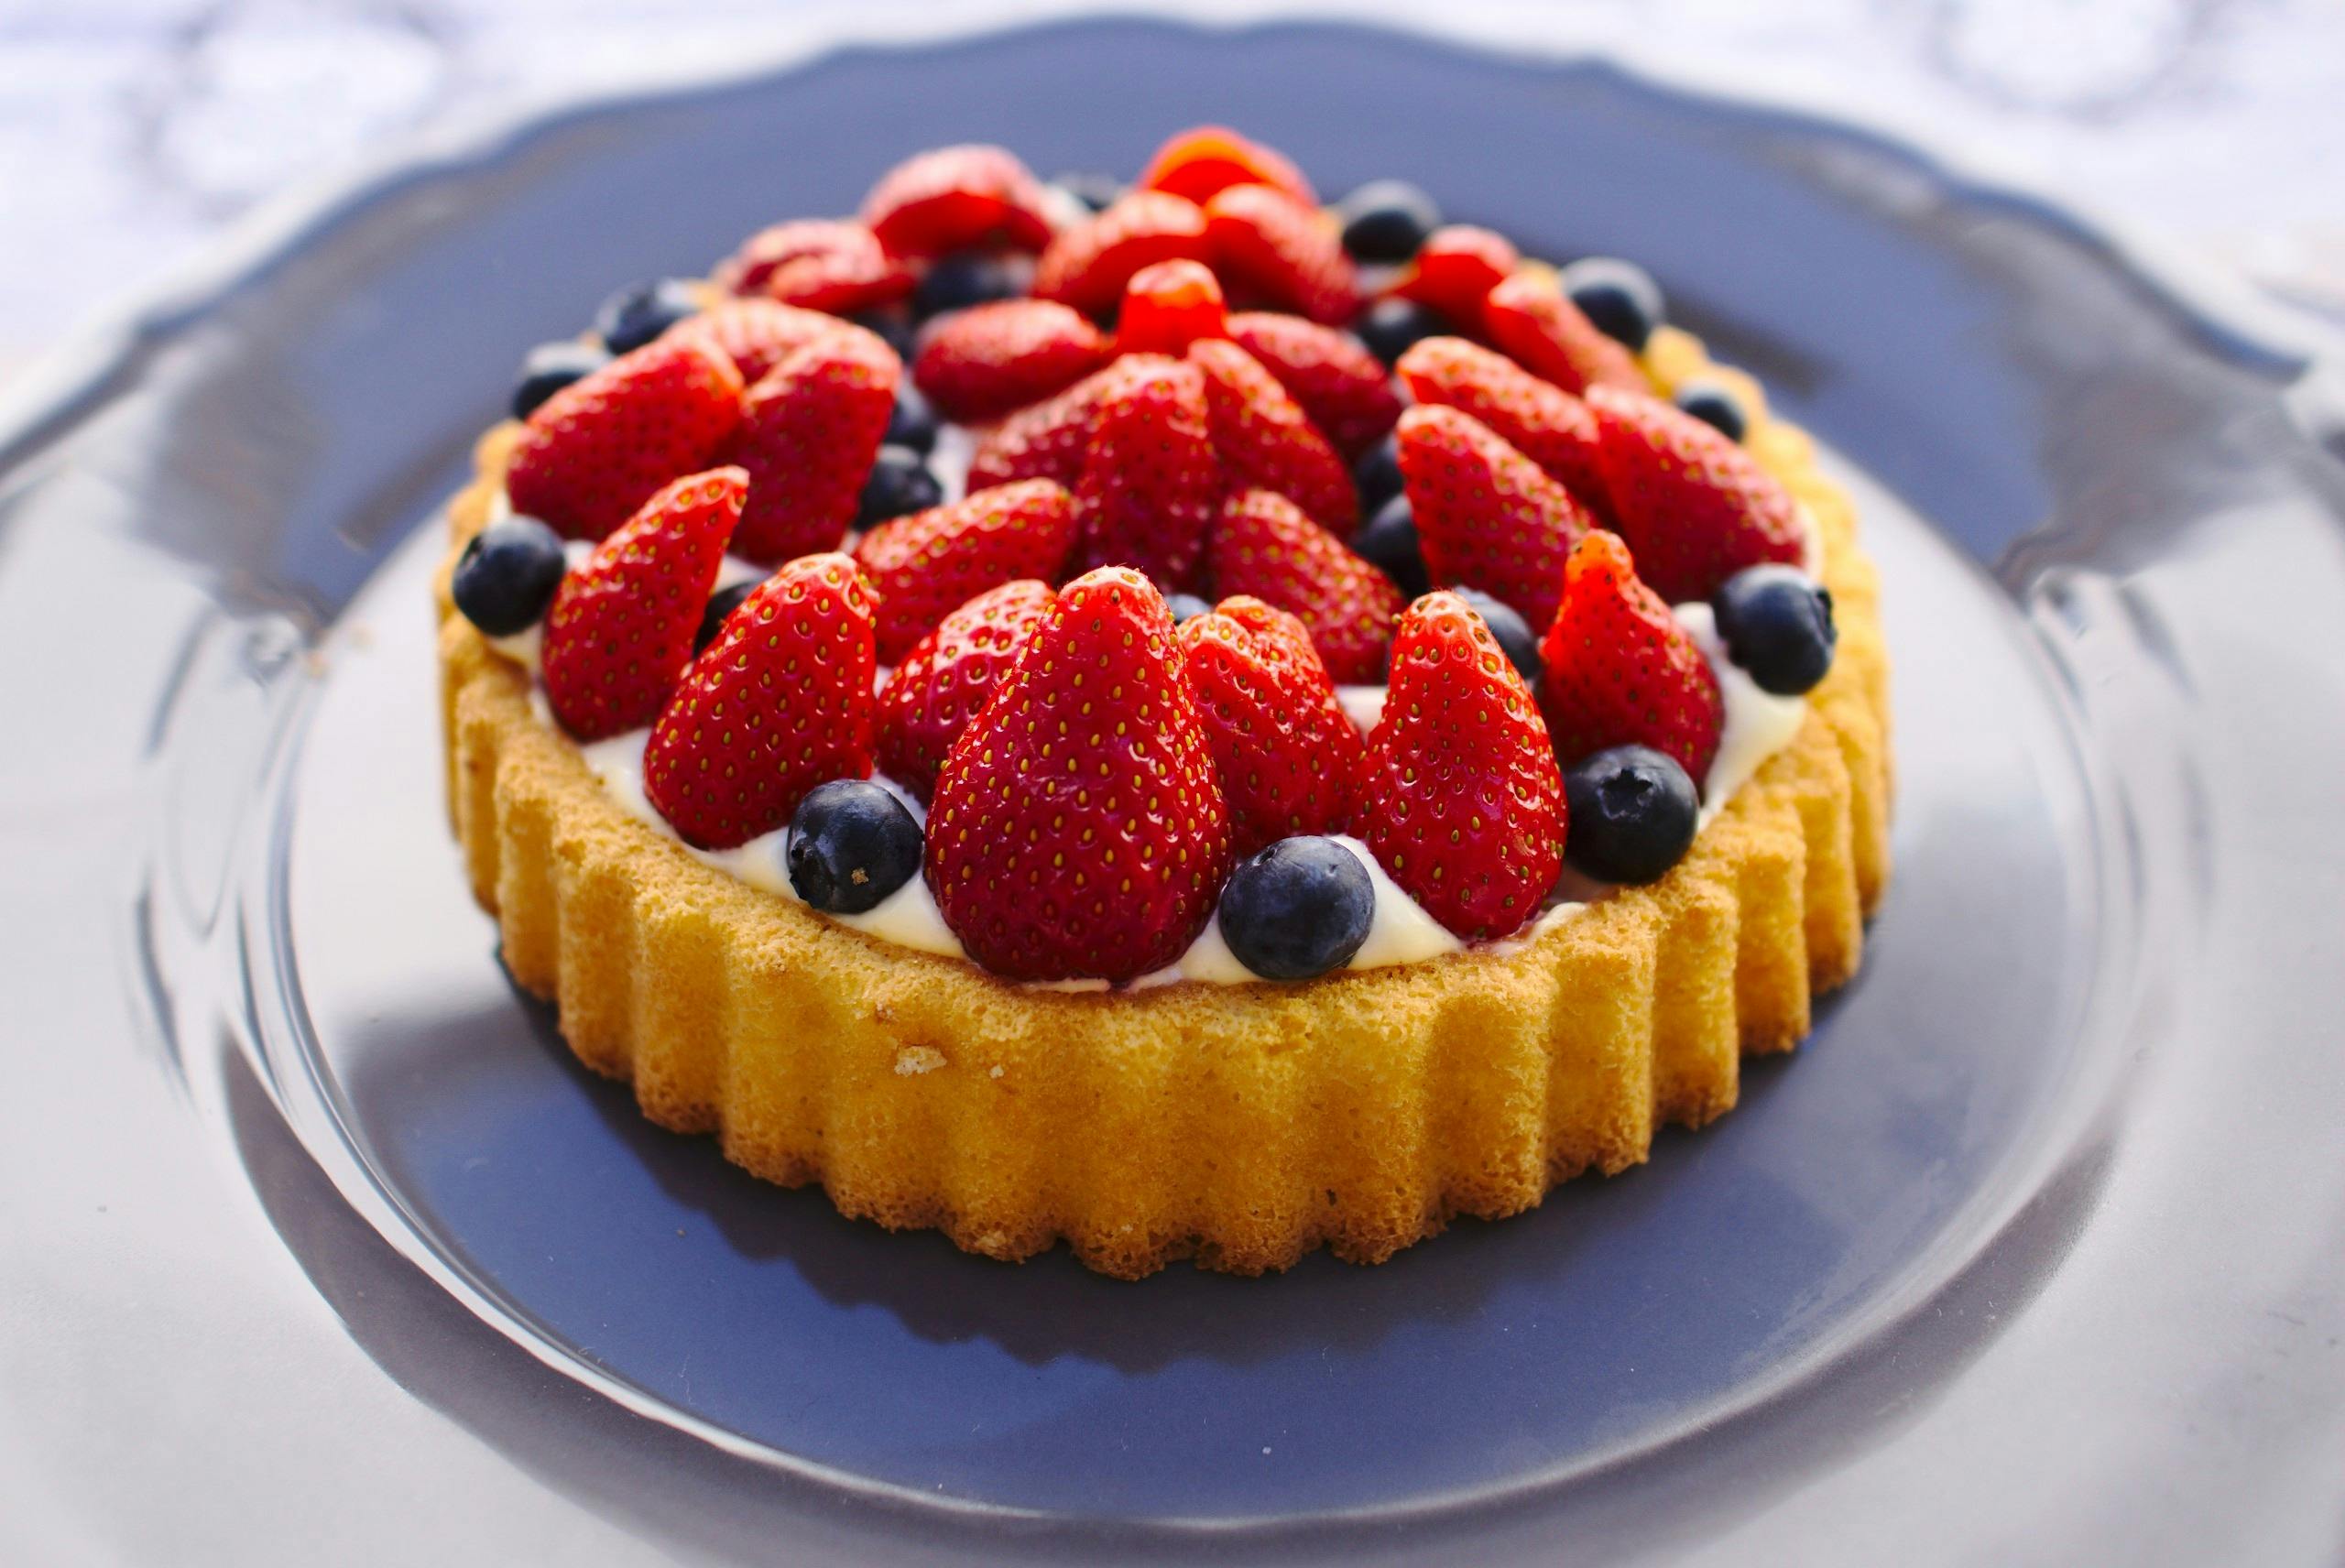 Cream cheese dessert recipe featuring a golden tart topped with a creamy layer and a vibrant arrangement of fresh strawberries and blueberries